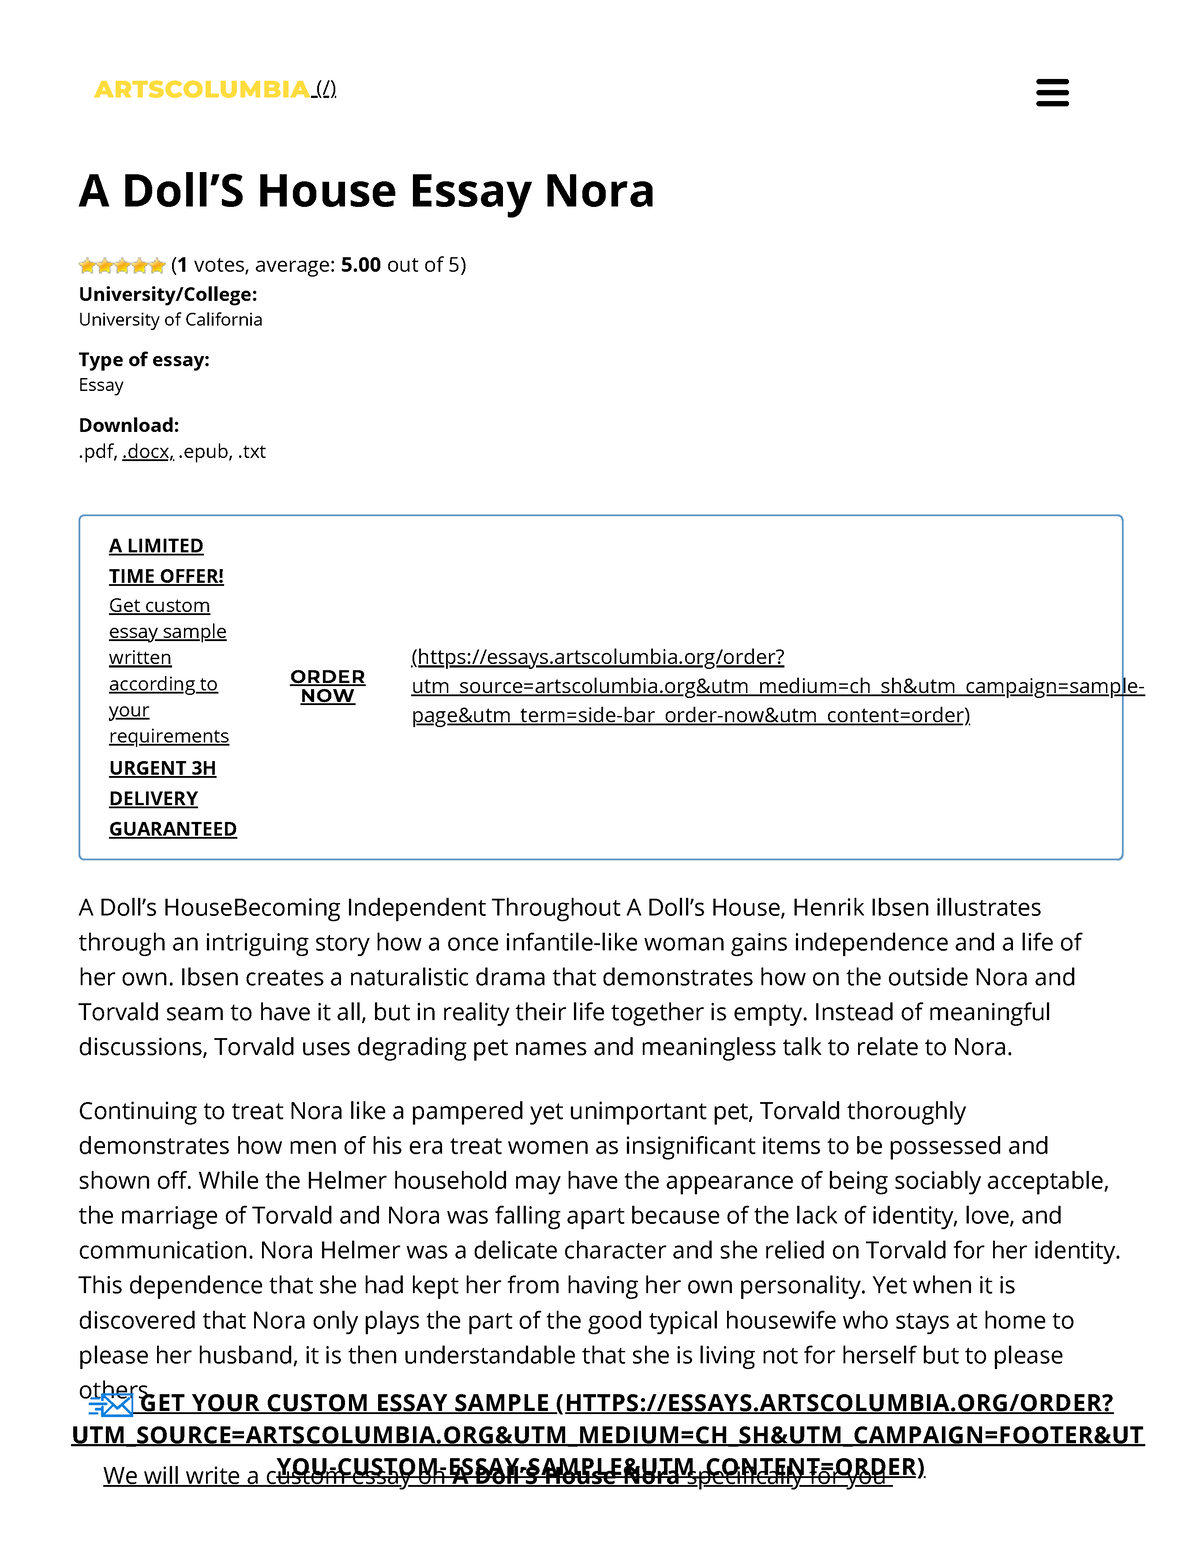 a doll's house comparative essay